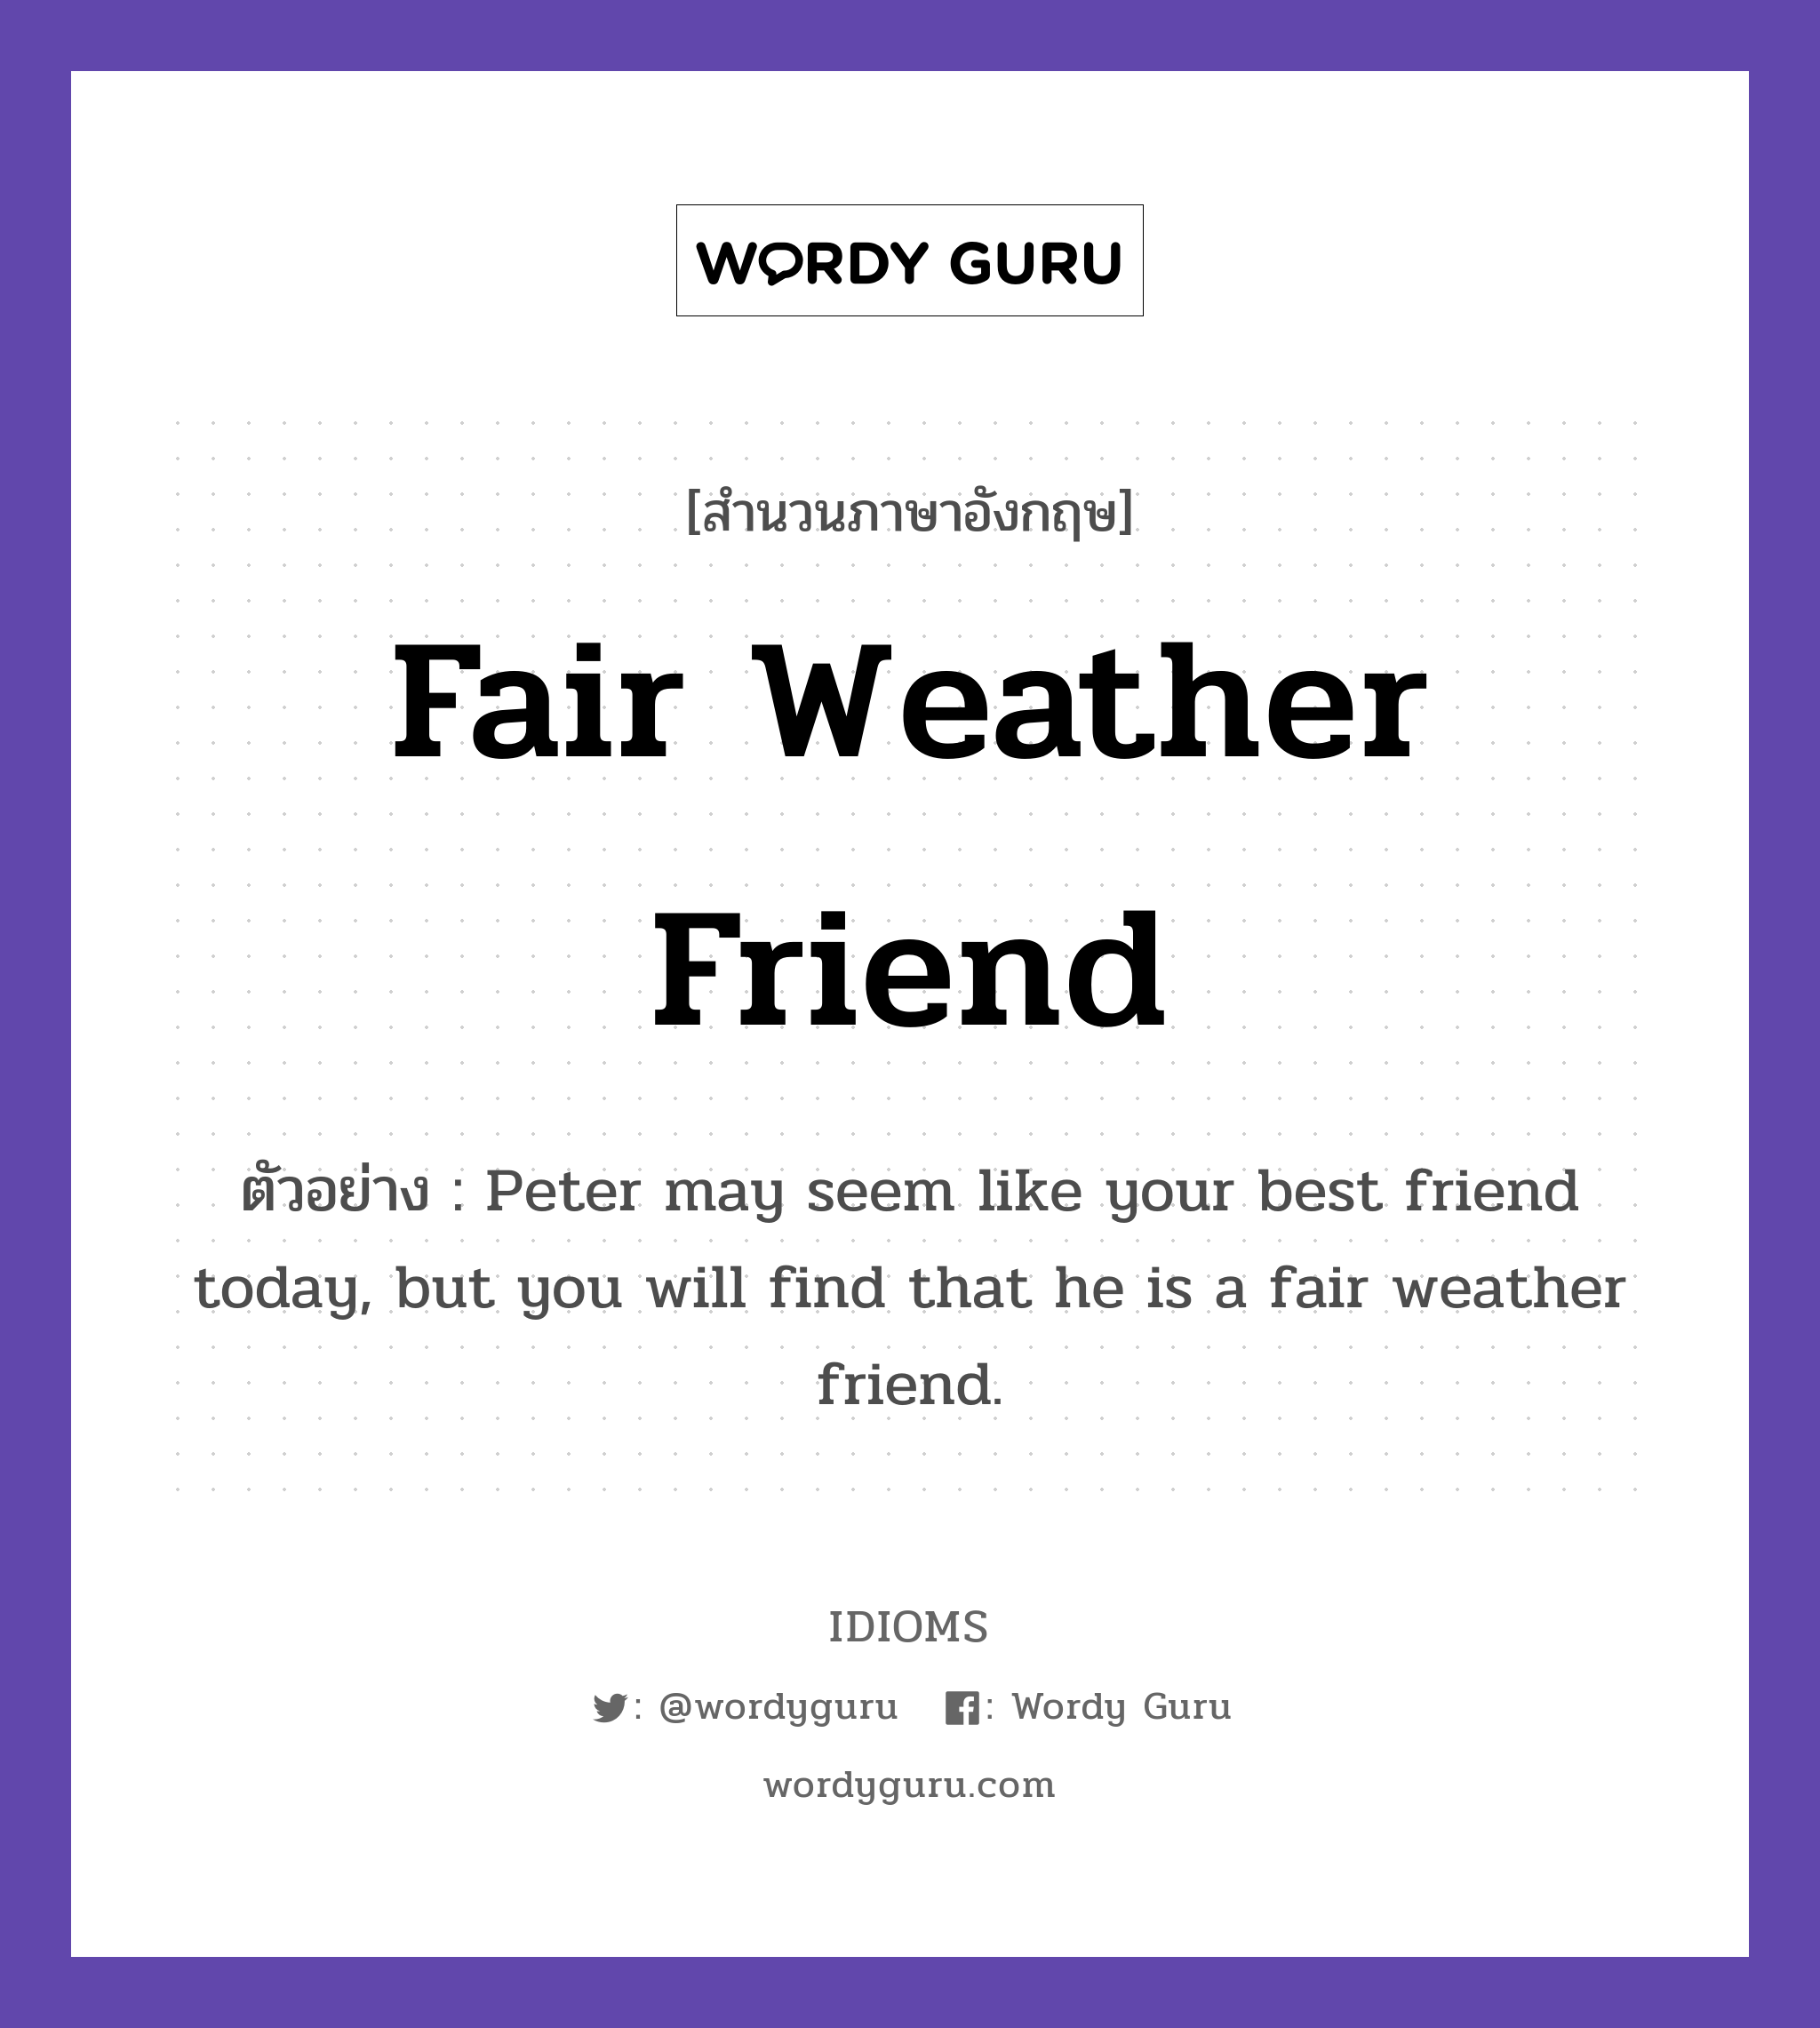 Fair Weather Friend แปลว่า?, สำนวนภาษาอังกฤษ Fair Weather Friend ตัวอย่าง Peter may seem like your best friend today, but you will find that he is a fair weather friend.